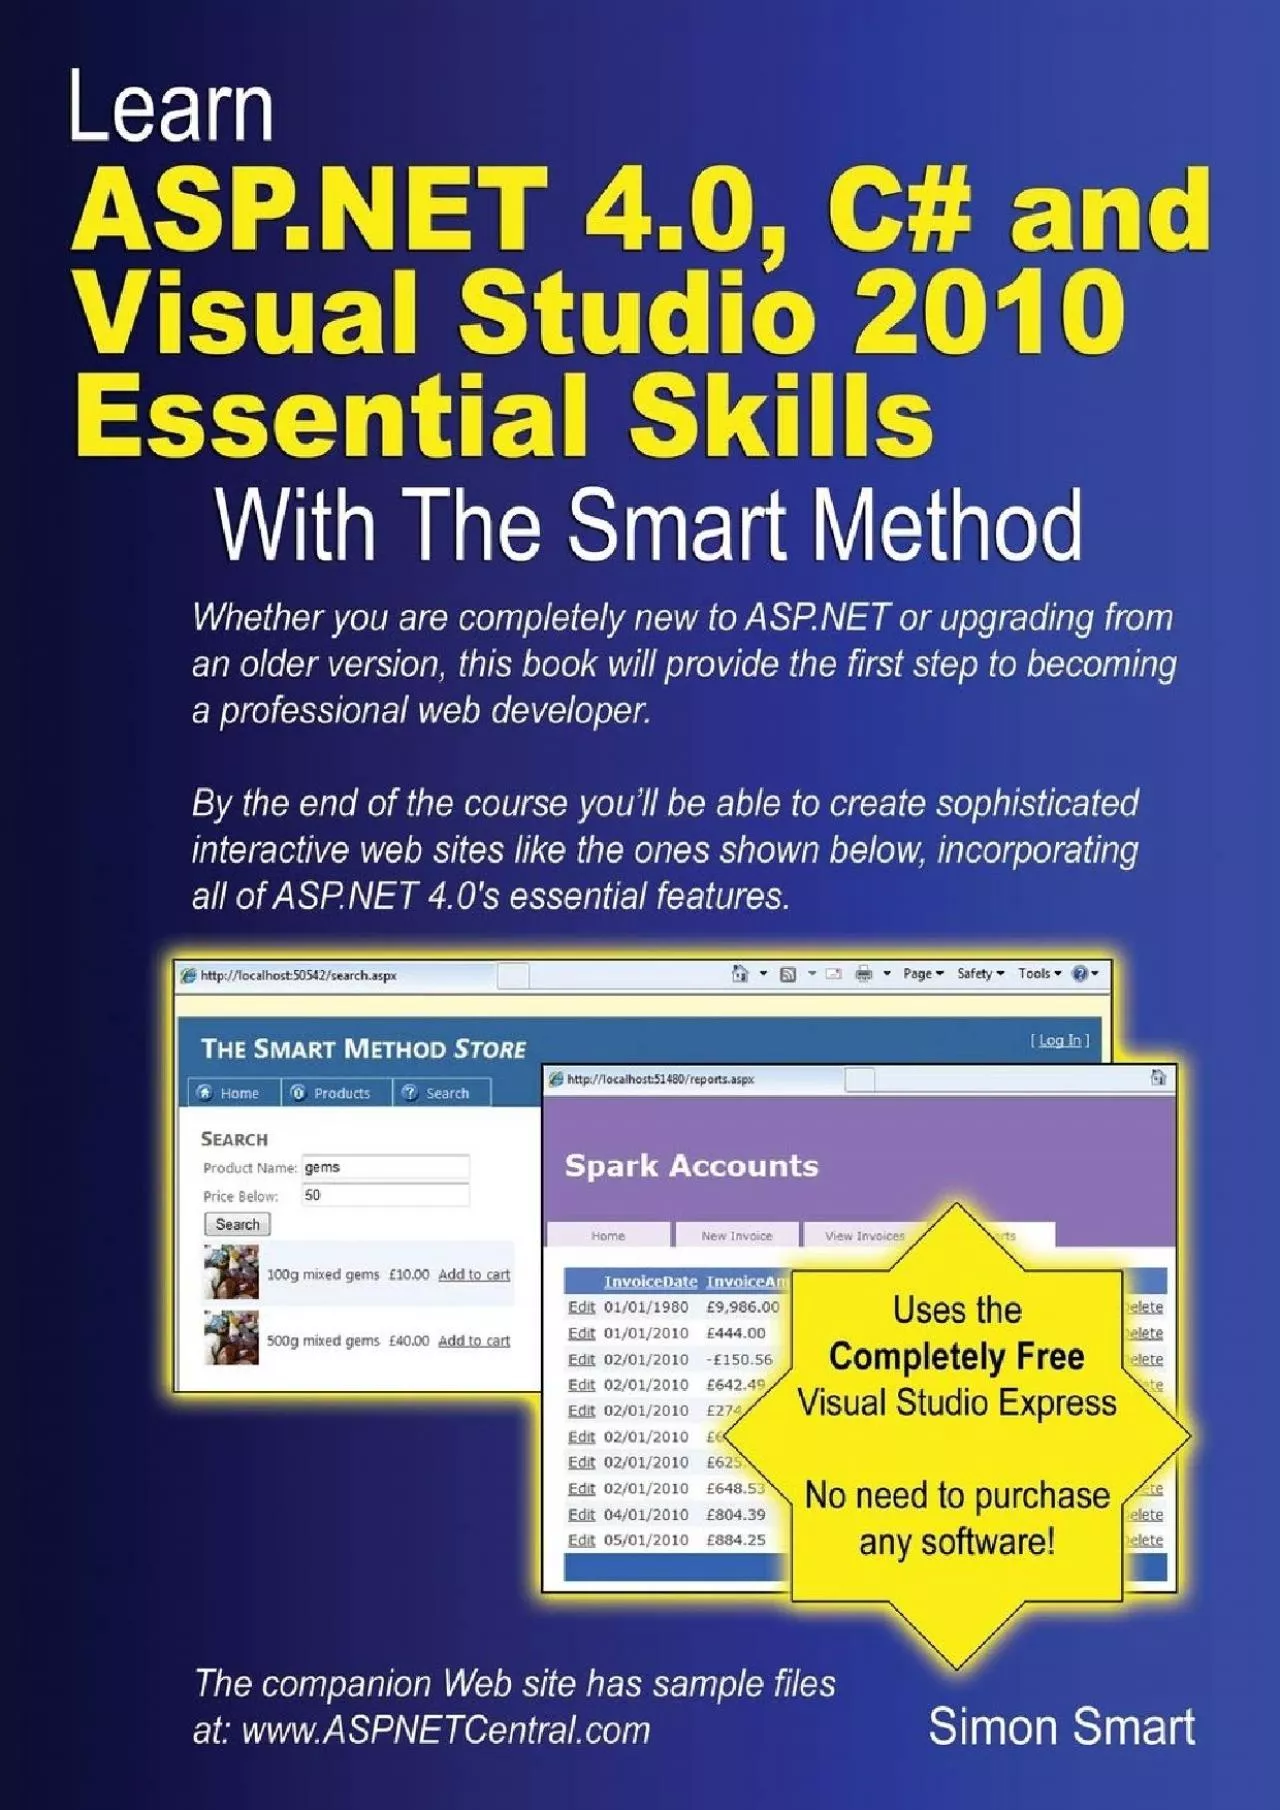 [DOWLOAD]-Learn ASP.NET 4.0, C and Visual Studio 2010 Essential Skills with The Smart